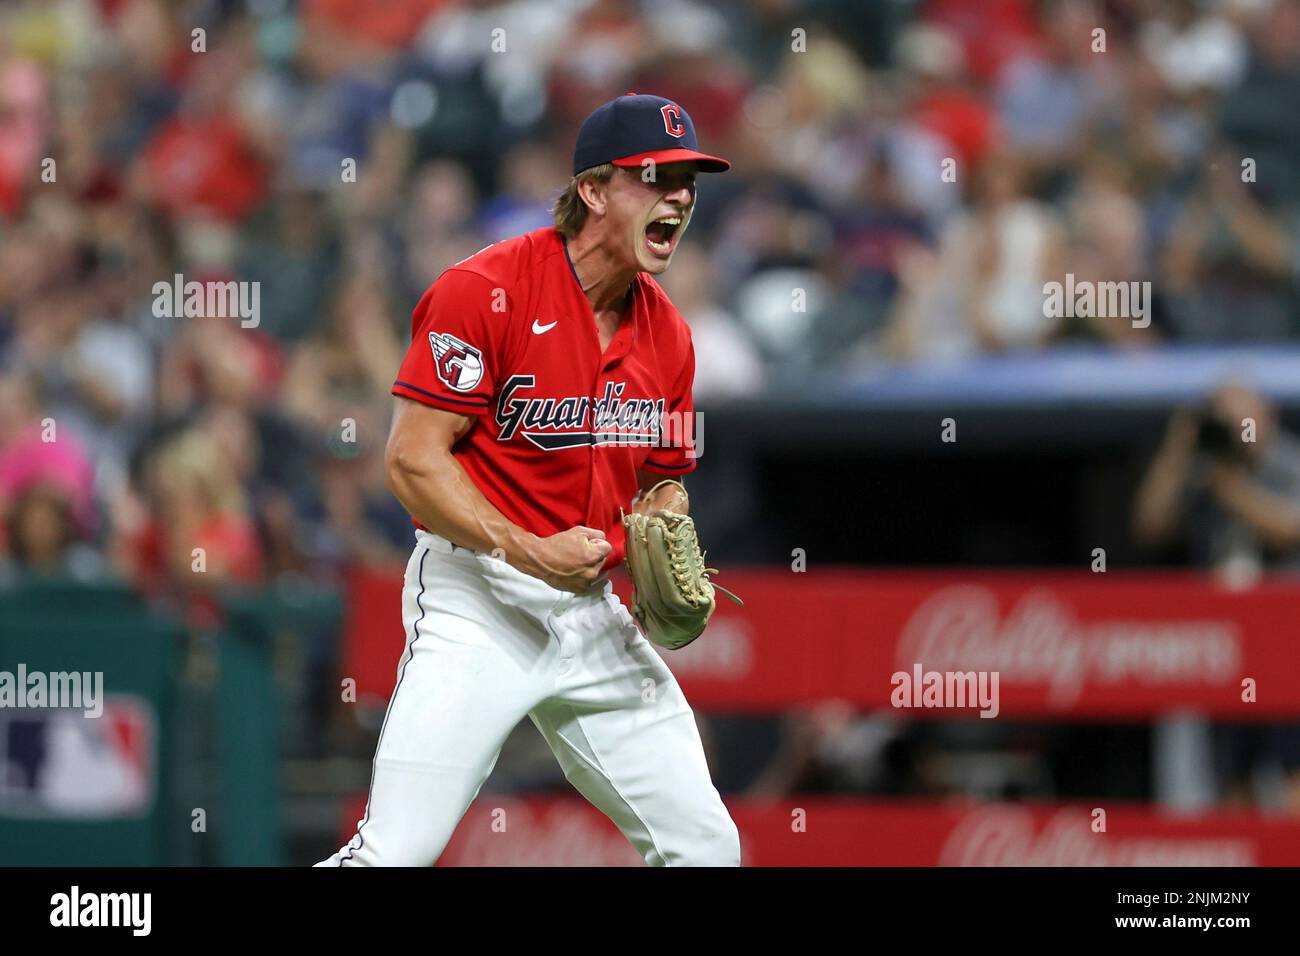 CLEVELAND, OH - AUGUST 01: Cleveland Guardians relief pitcher James  Karinchak (99) reacts after striking out Arizona Diamondbacks designated  hitter Seth Beer (28) (not pictured) to end the eighth inning of the